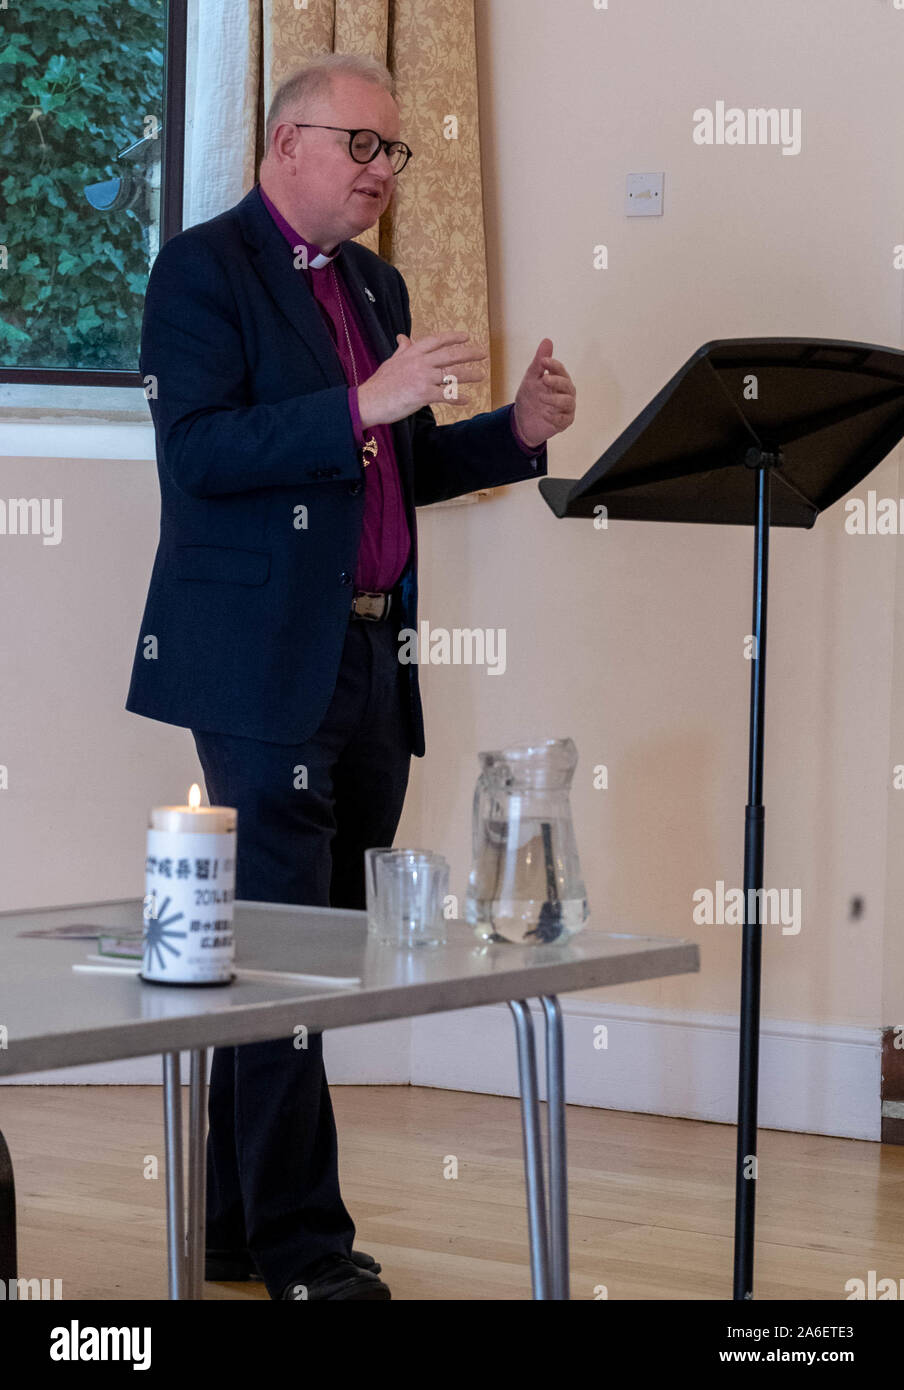 Brentwood Essex UK, 26th Oct.2019 Christian Campaing for Nuclear Disarmament annual General meeting at Brentwood Cathedral, Brentwood, UK on the theme 'Unclear wepons, the other extinction threat', Bishop Roger Morris of Colchester opened the meeting Credit Ian DavidsonAlamy Live News Stock Photo